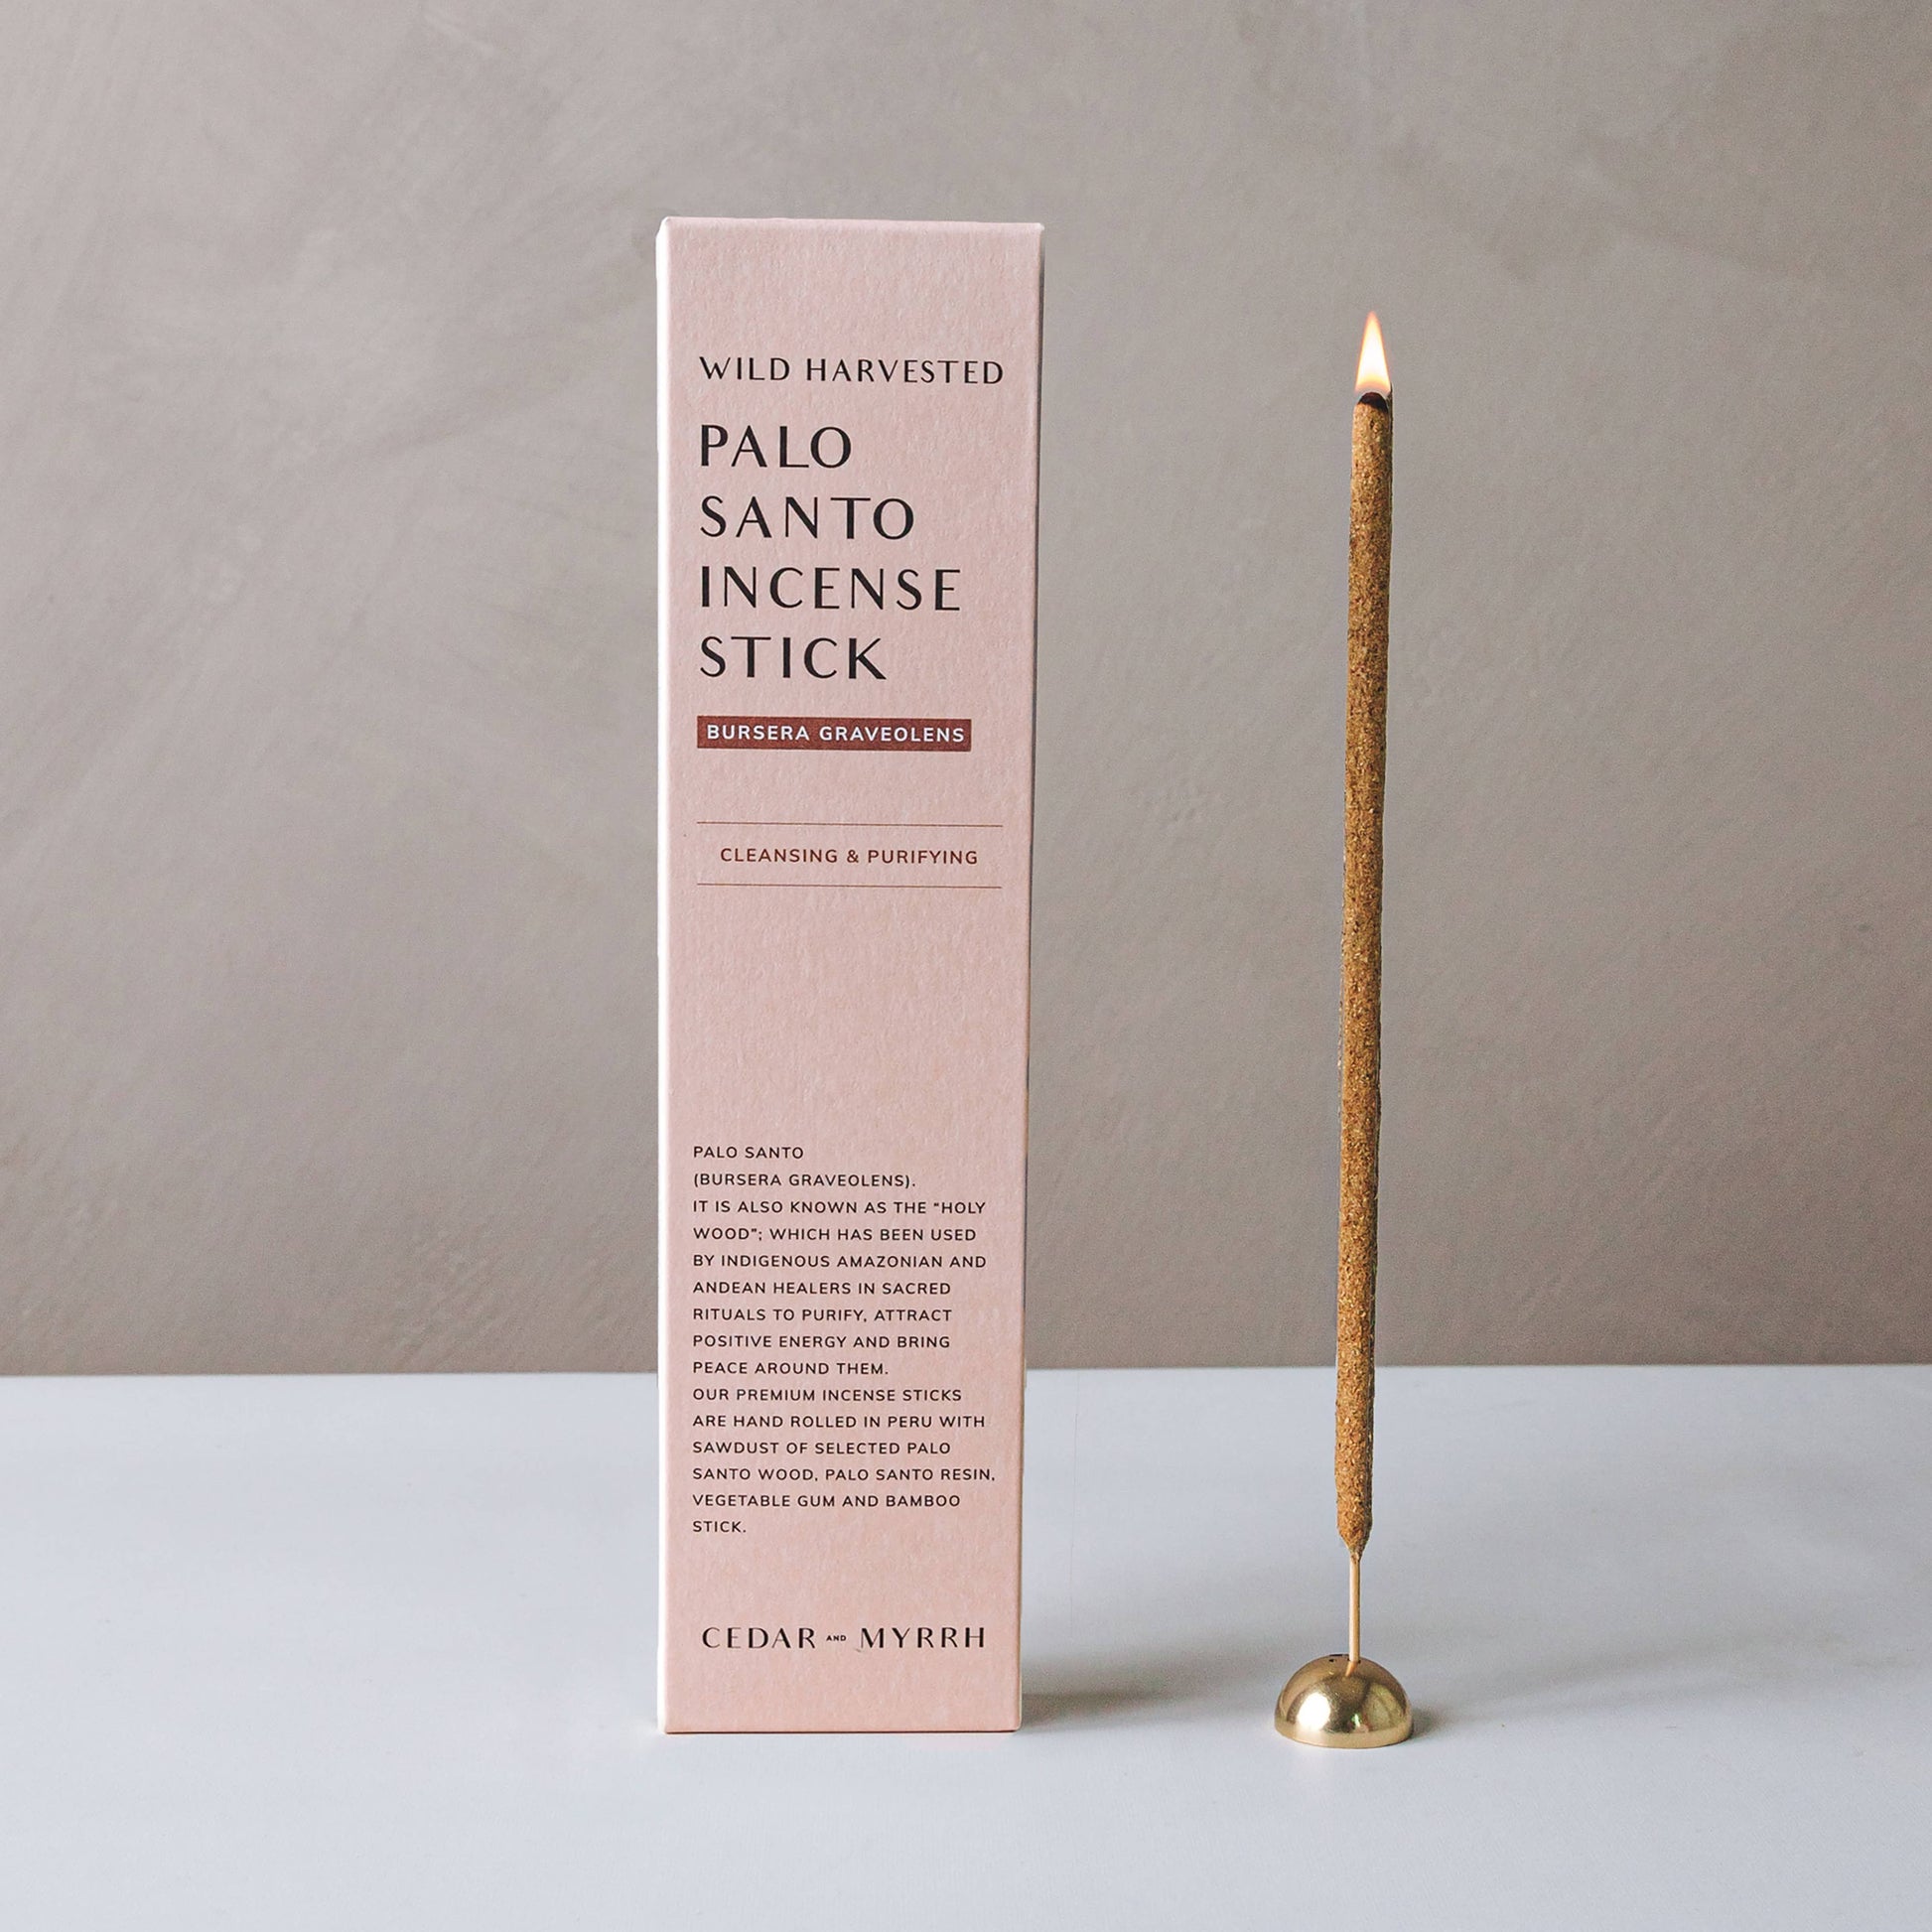 [Burning Ritual] Hand Rolled Palo Santo Incense Stick - The Crowd Went Wild